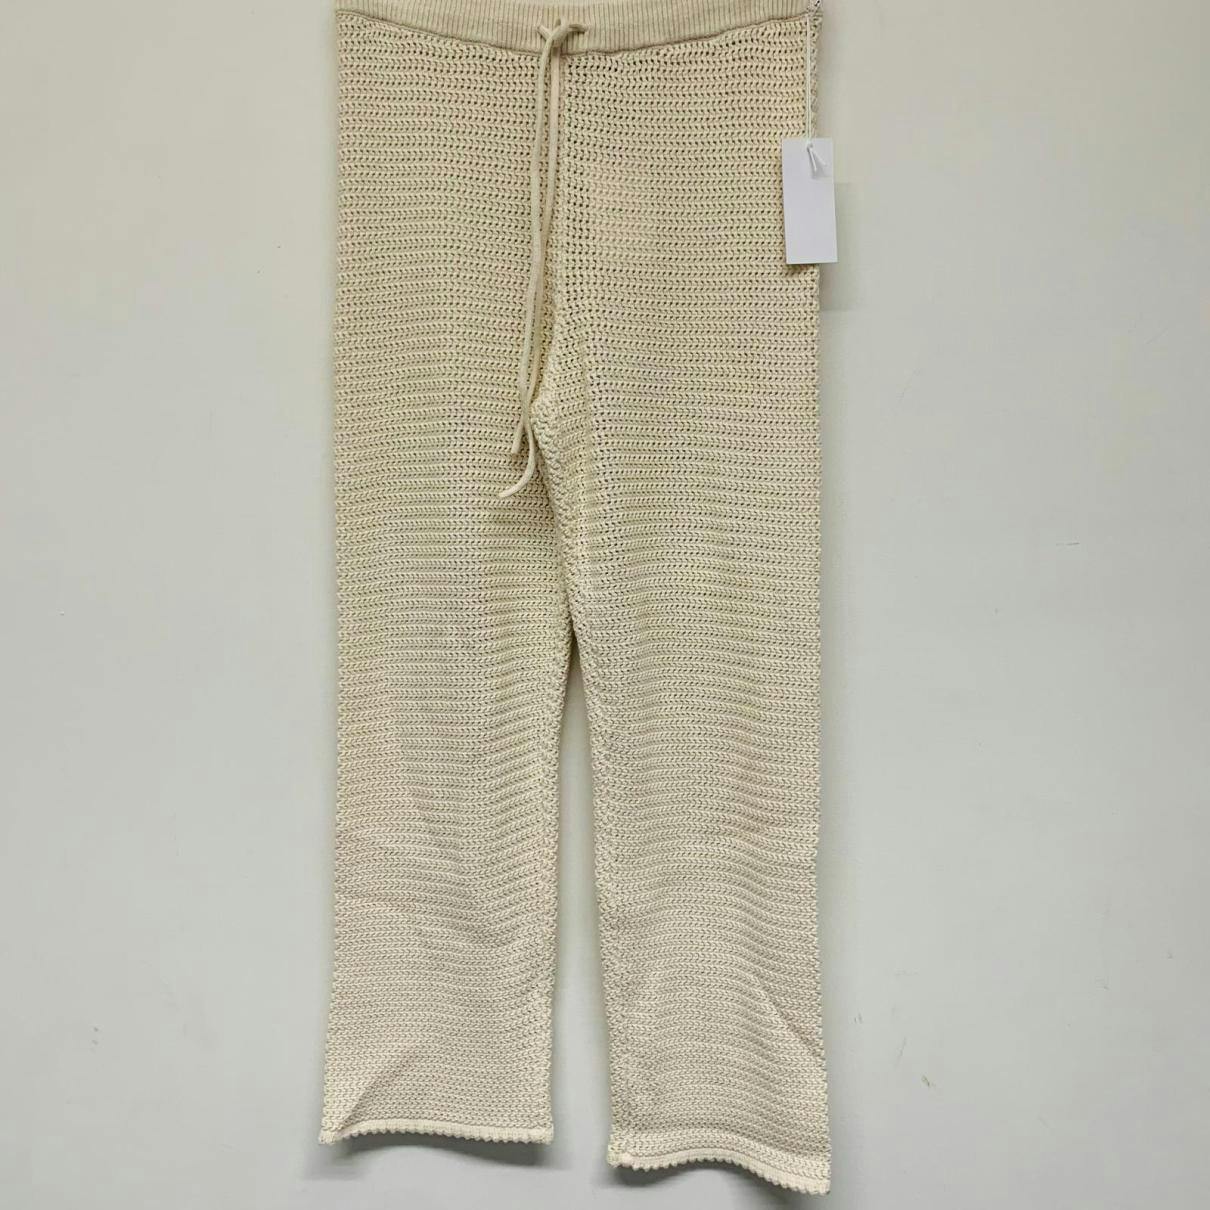 https://images.vestiairecollective.com/cdn-cgi/image/q=75,f=auto,/produit/white-synthetic-reformation-trousers-35136158-9_2.jpg?secret=VC-e9eee96a-a819-4431-ad12-d066be2626ef